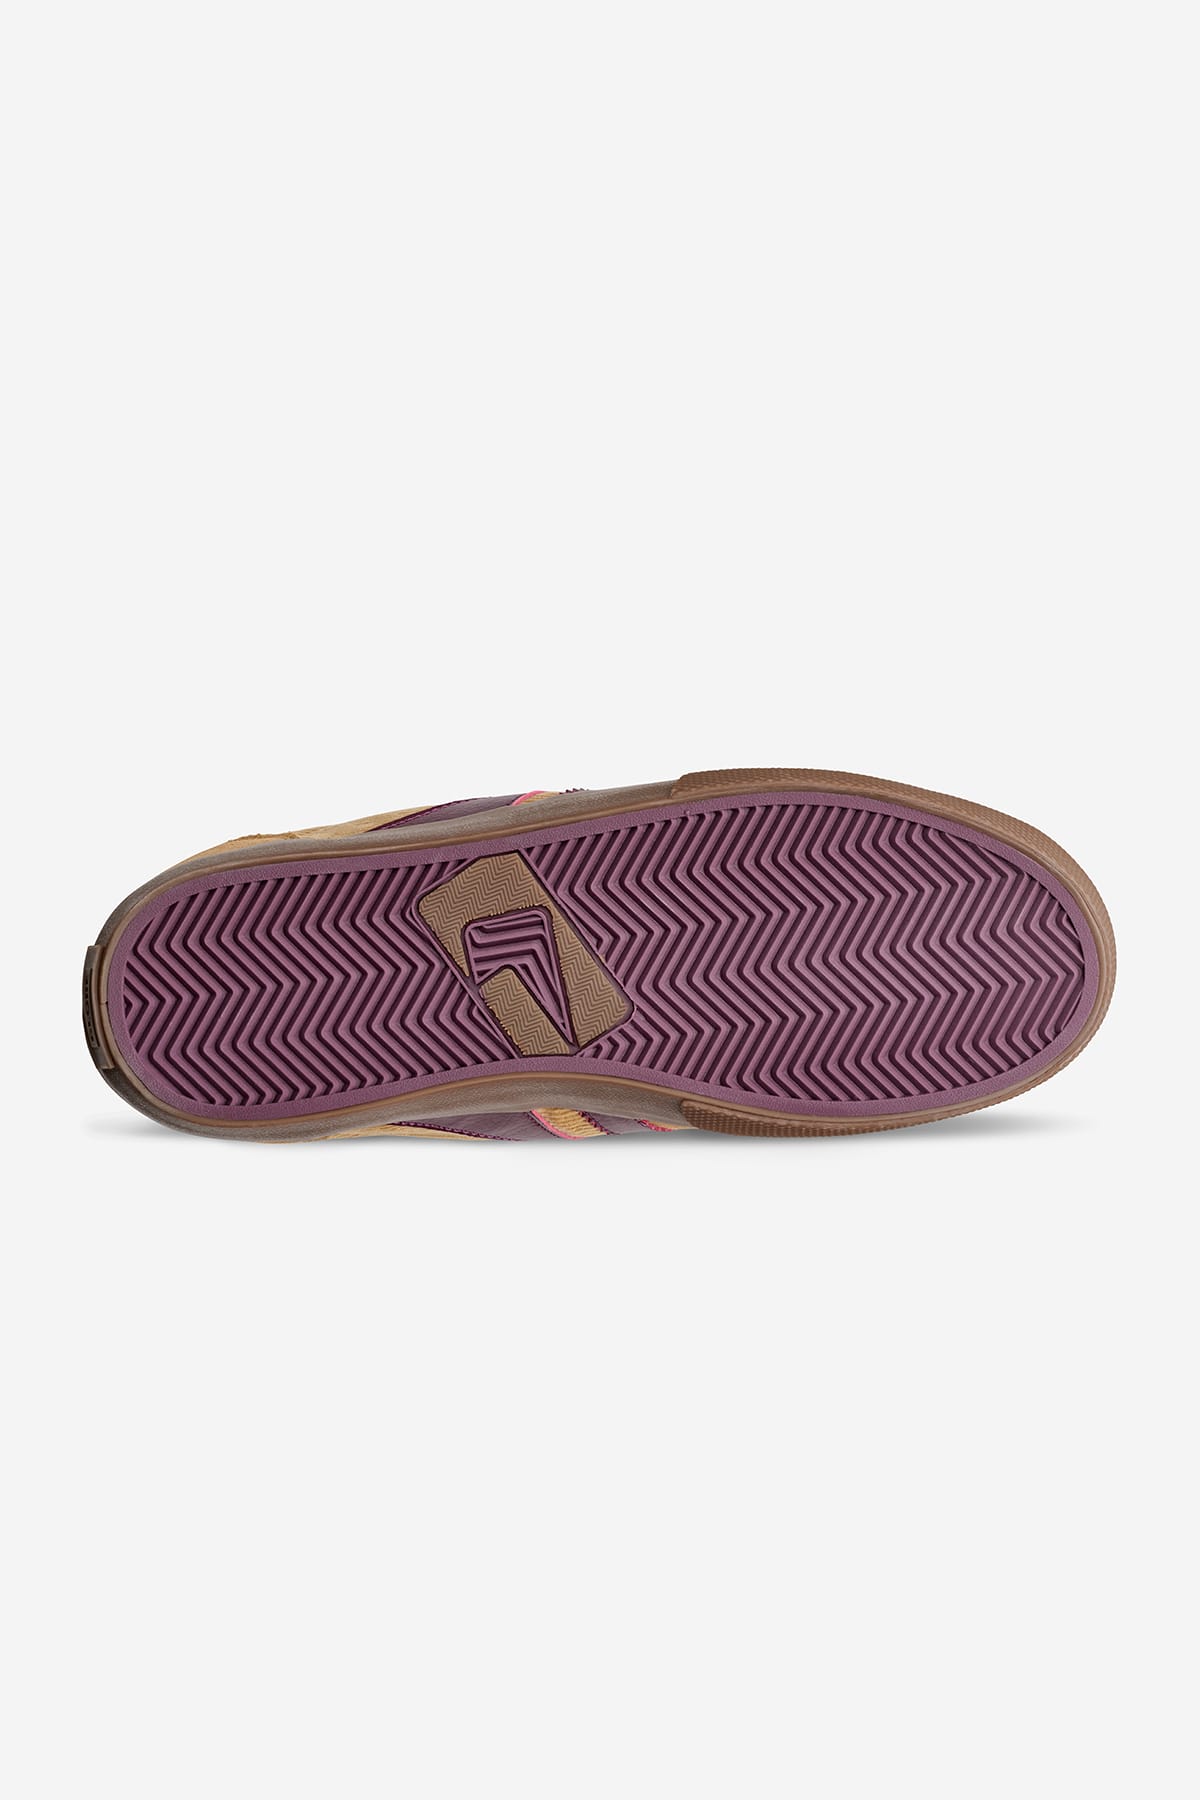 encore 2 curry wine skateboard chaussures